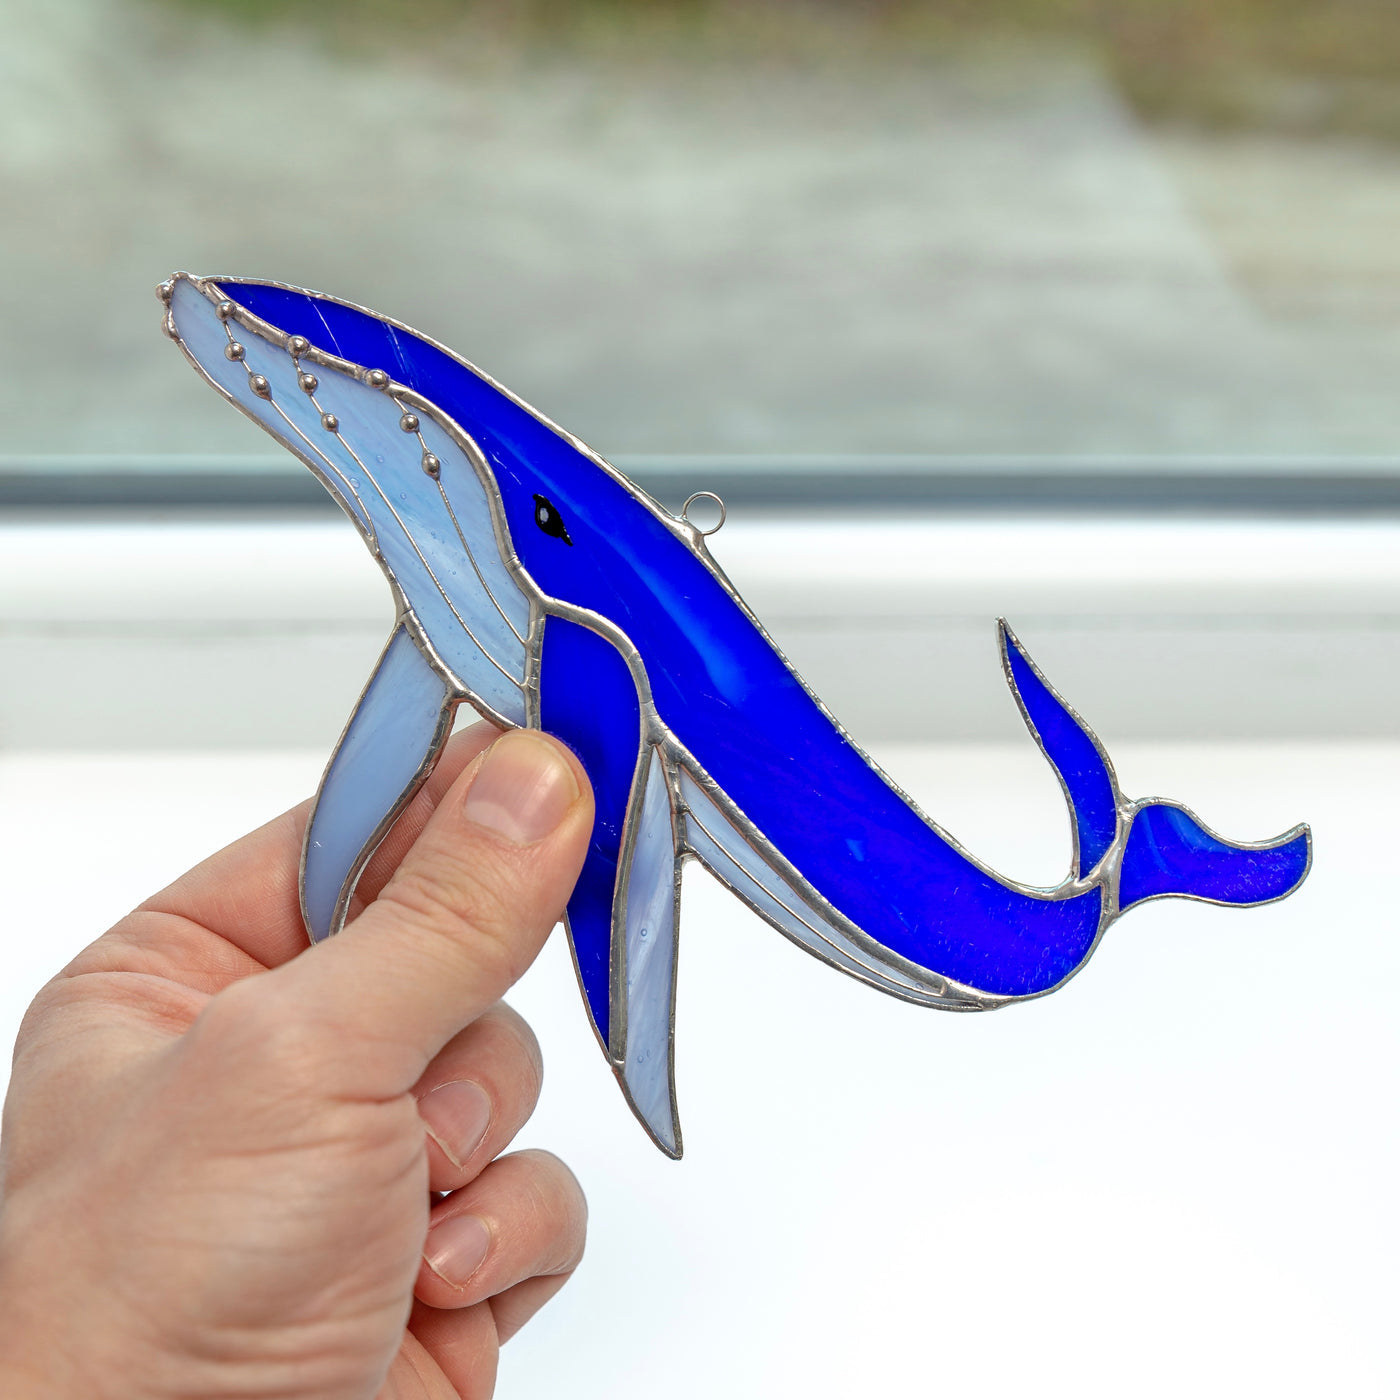 Stained glass whale window hanging of a royal blue colour with sky-blue lower part